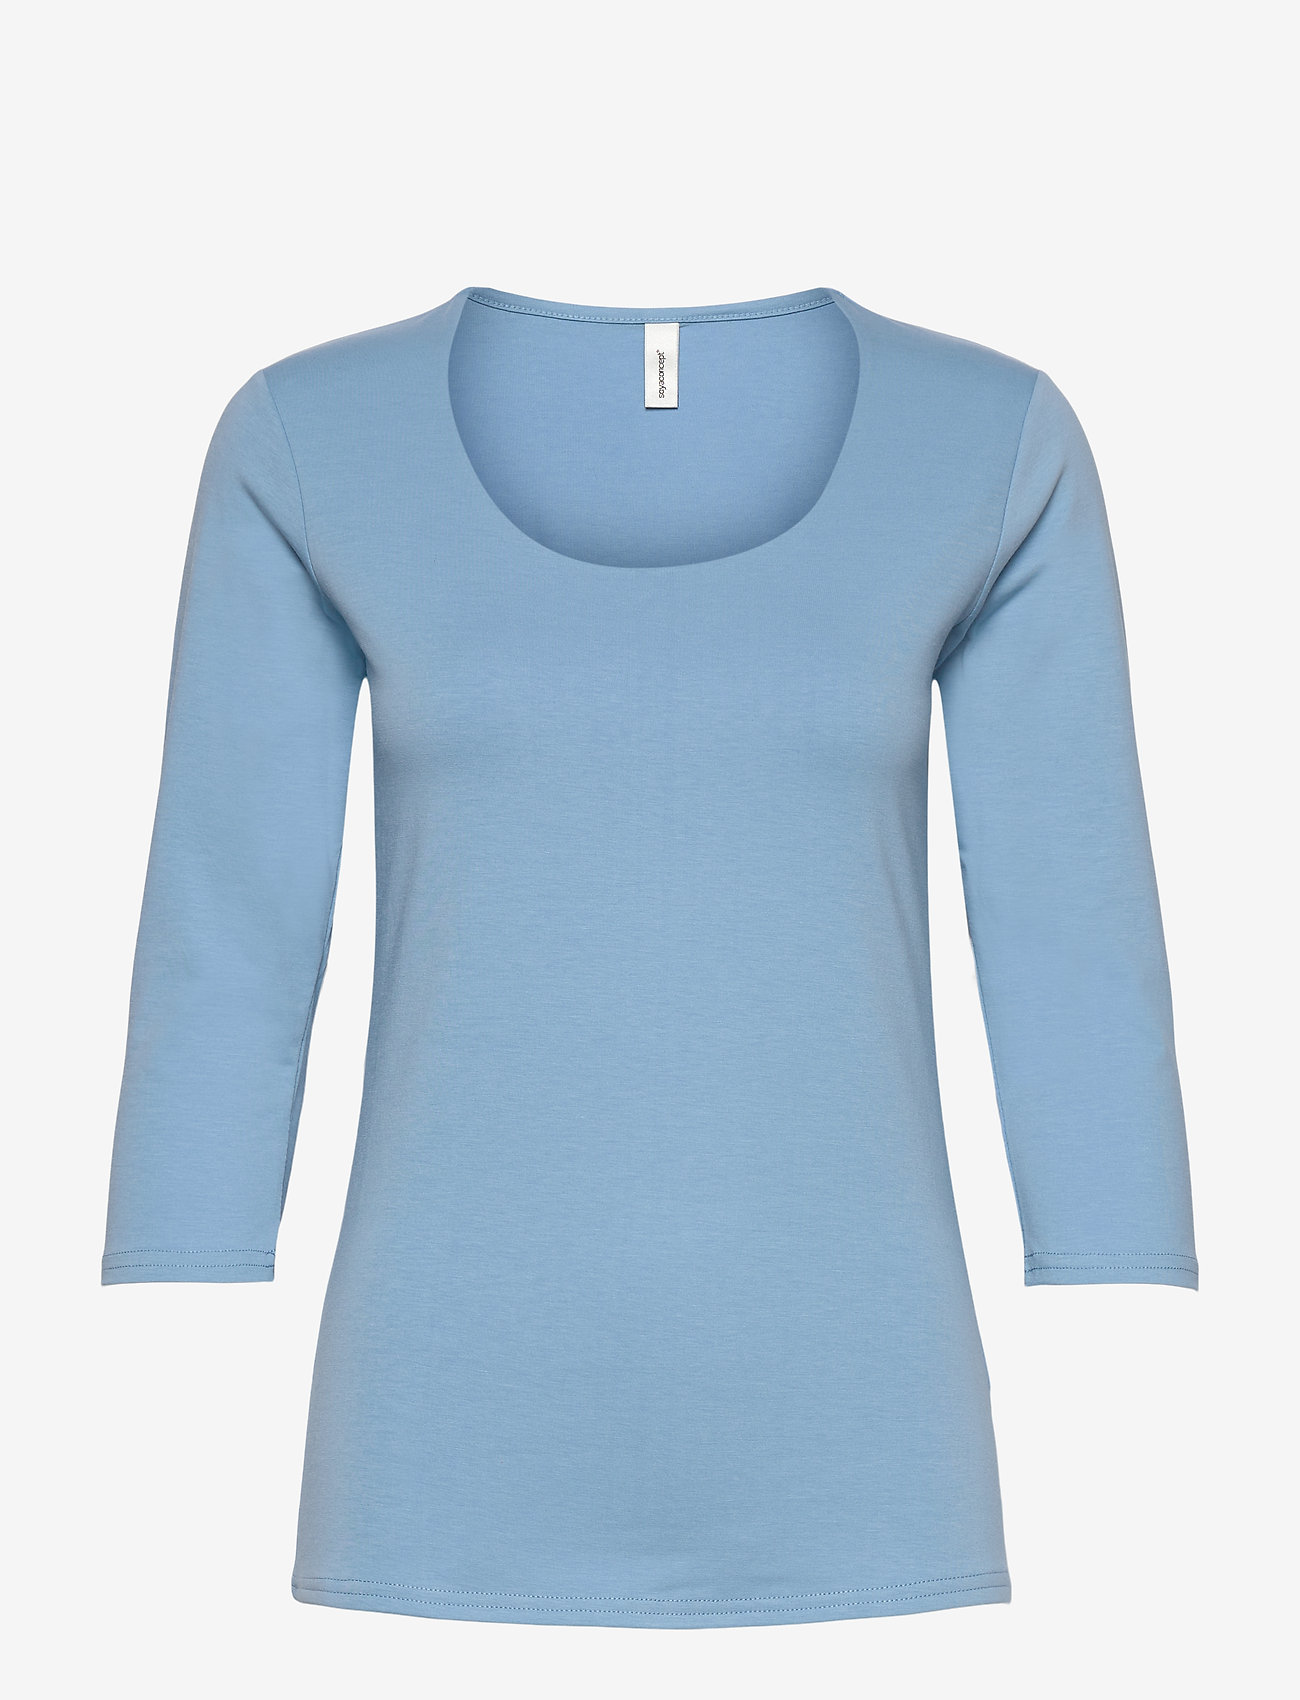 Soyaconcept - SC-PYLLE - long-sleeved tops - bright blue - 0